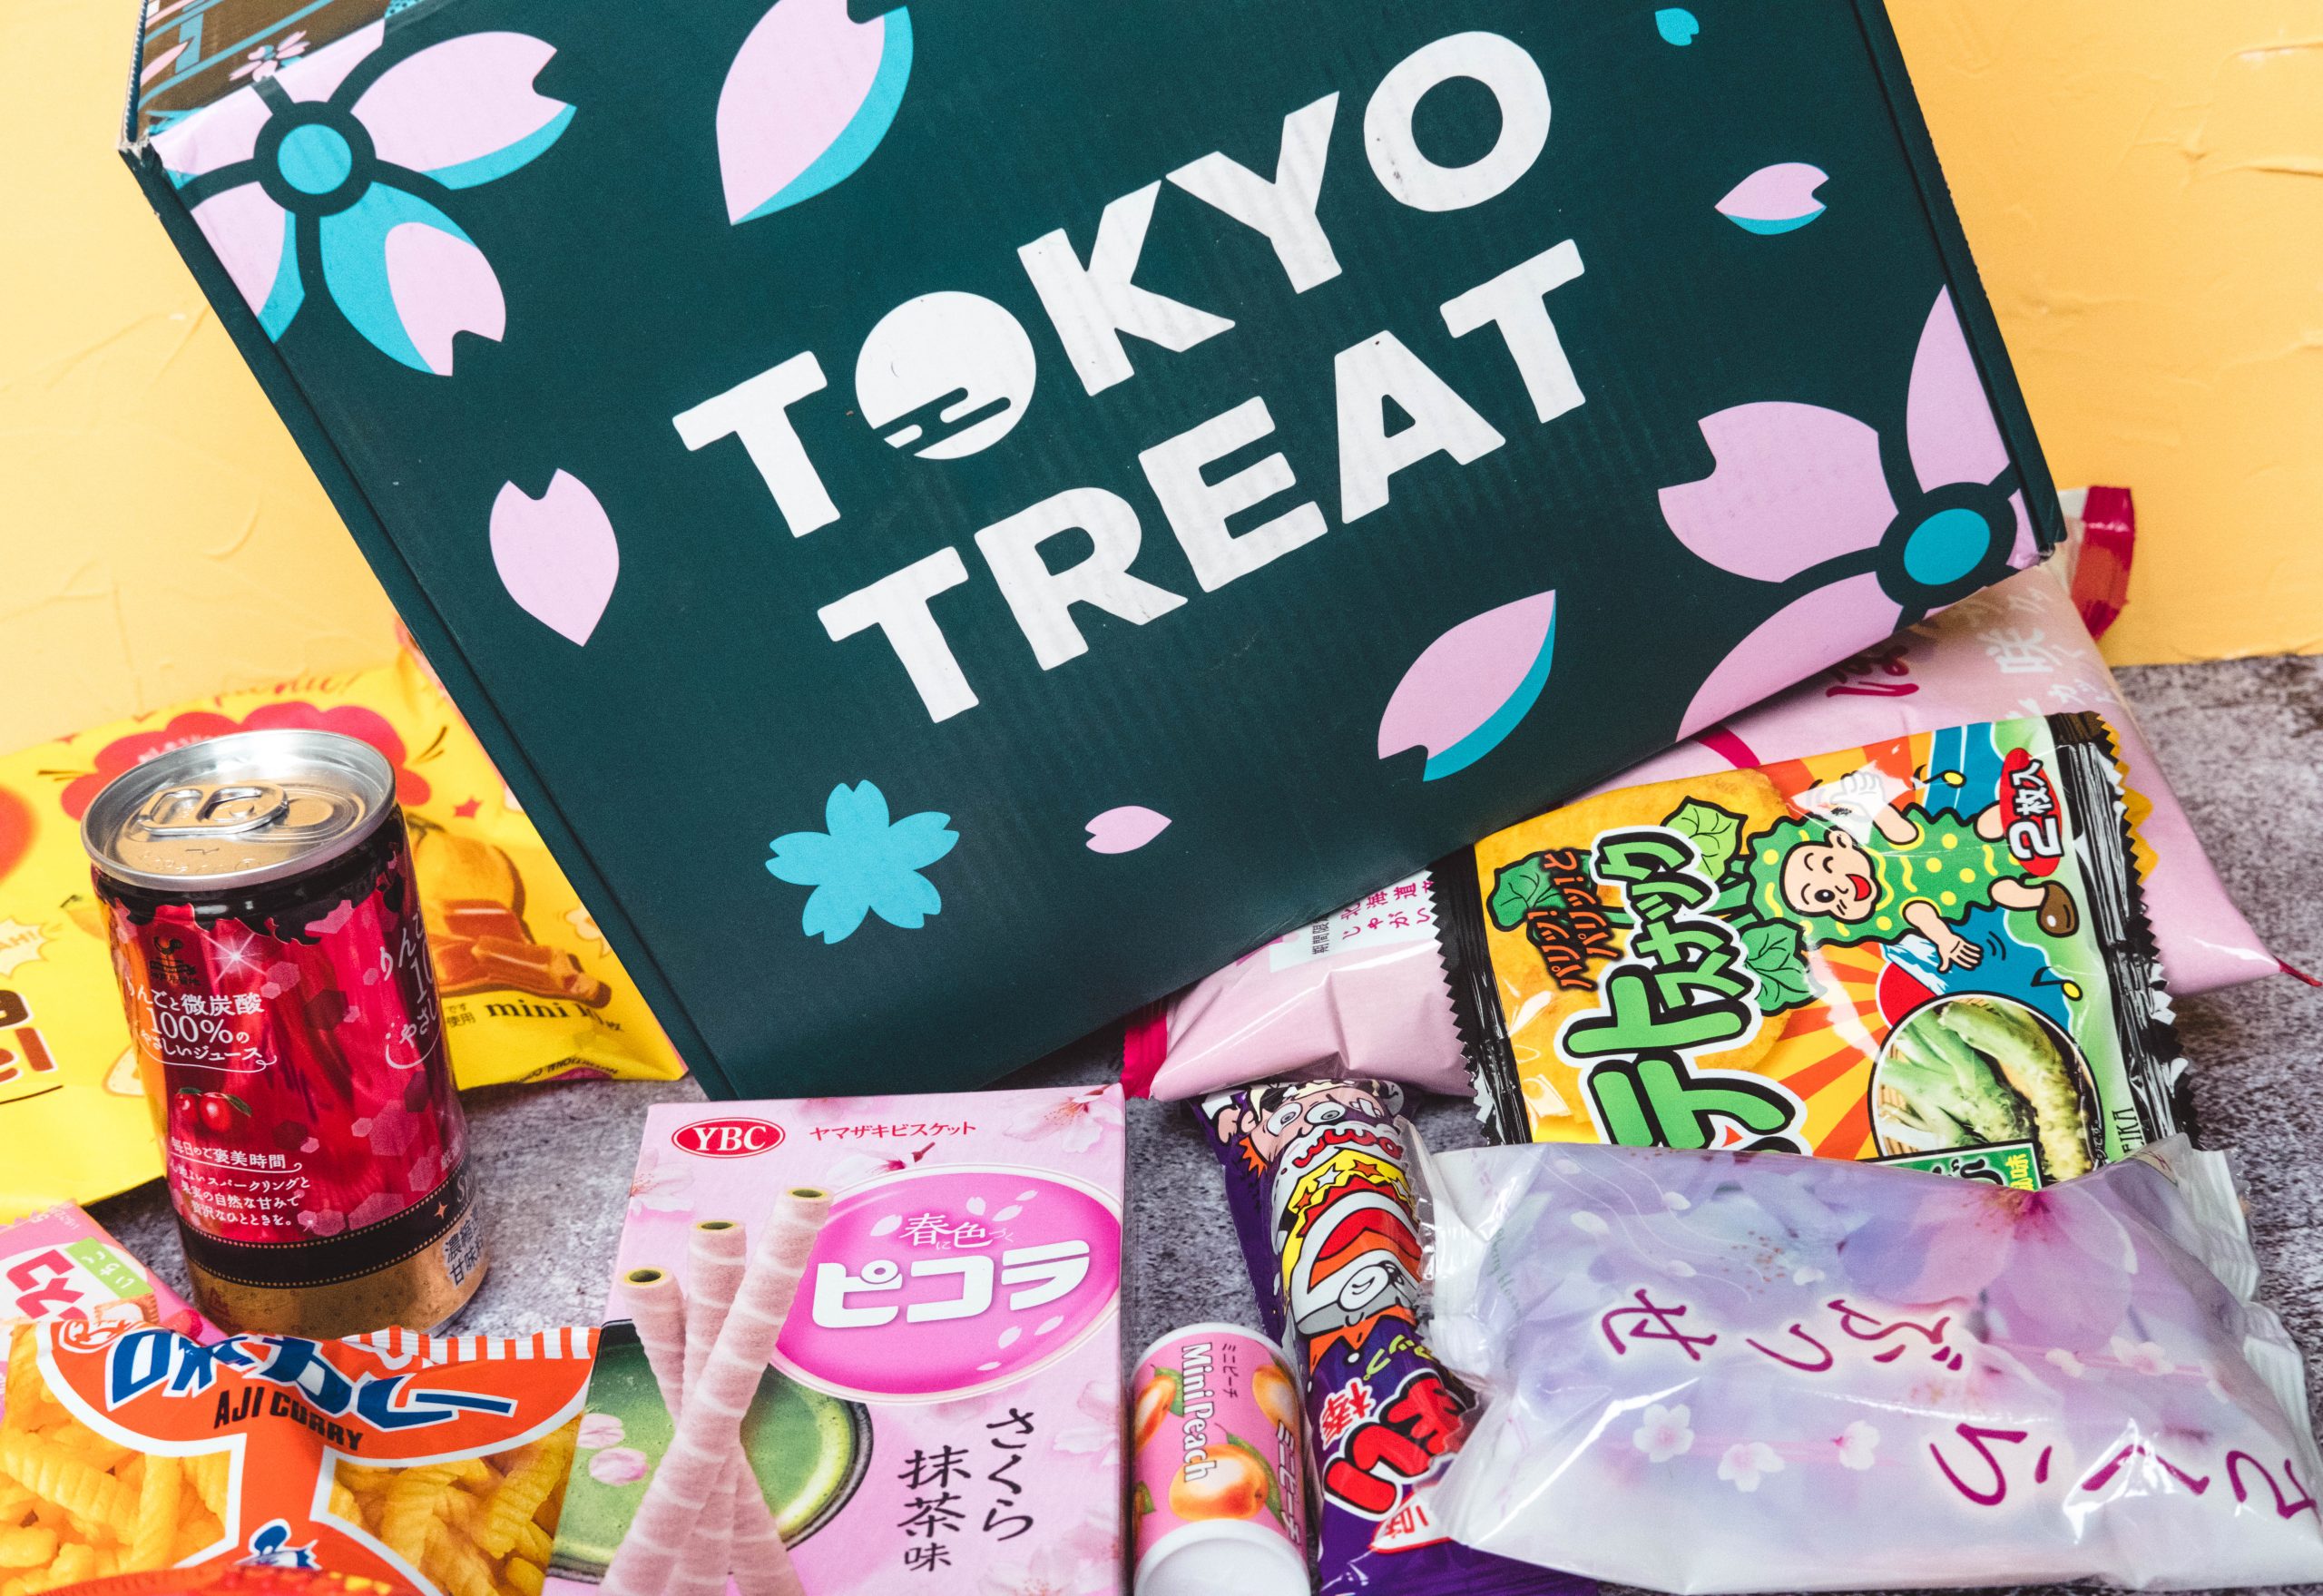 Tokyo treat box with some of its contents